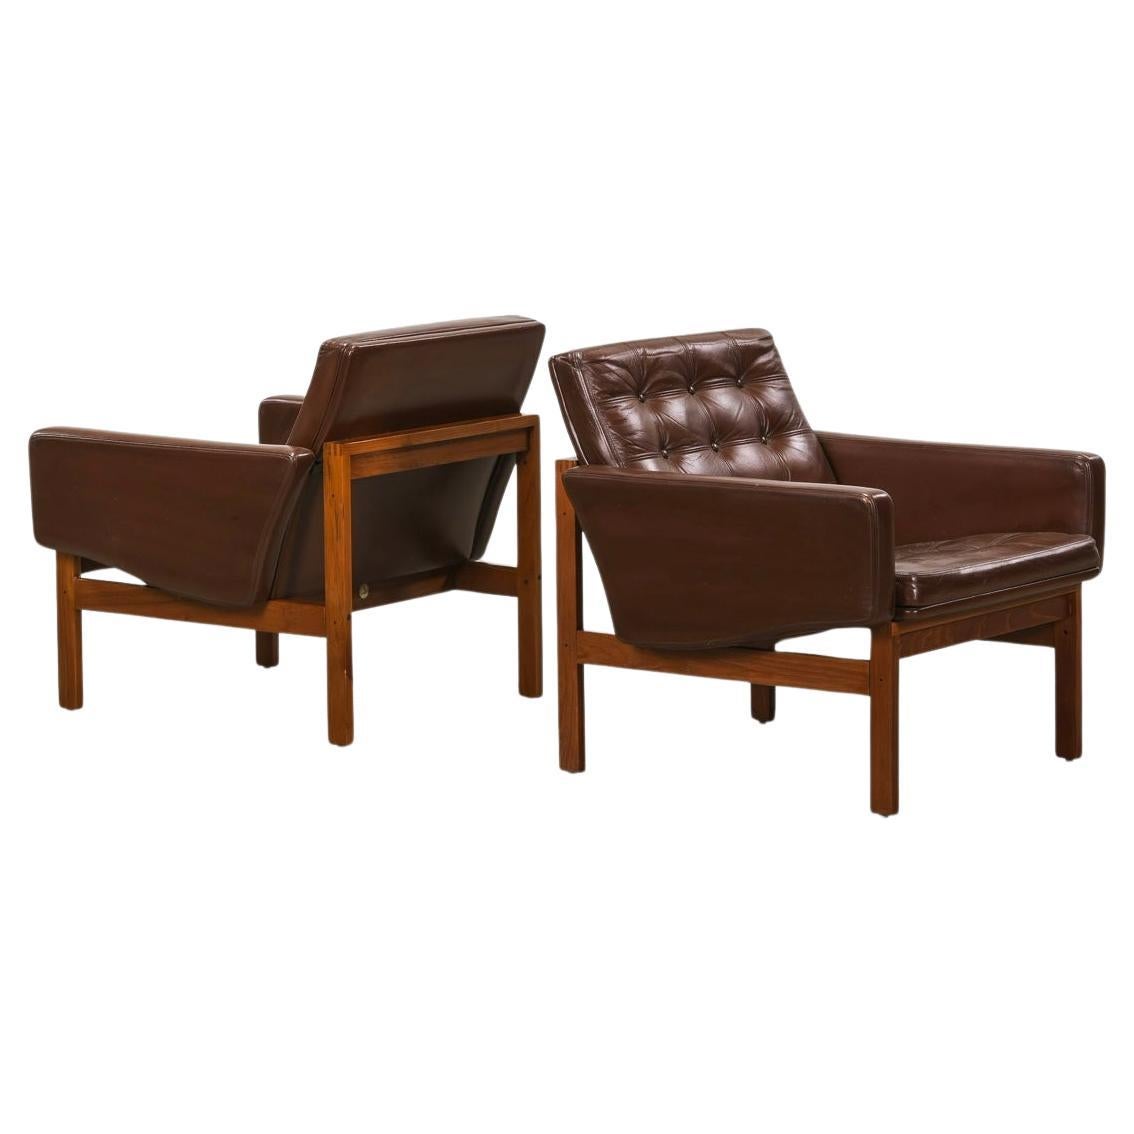 Pair of France & Son Moduline Brown Leather Chairs by Gjerlov-Knudsen